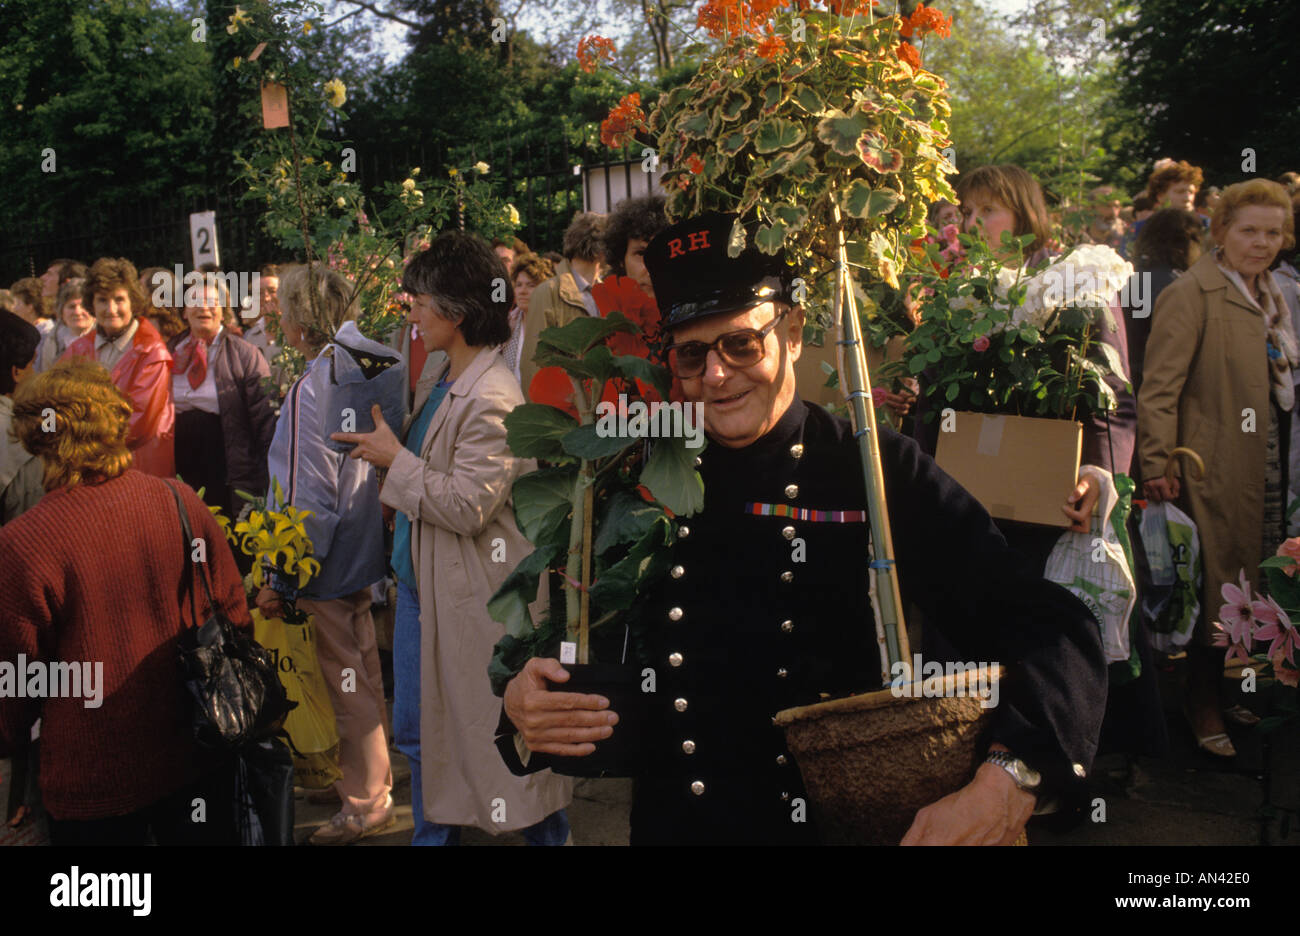 Last day of the Chelsea Flower show 1980s London UK. Chelsea Pensioner in uniform taking home some of the displayed flowers 1984.  HOMER SYKES Stock Photo